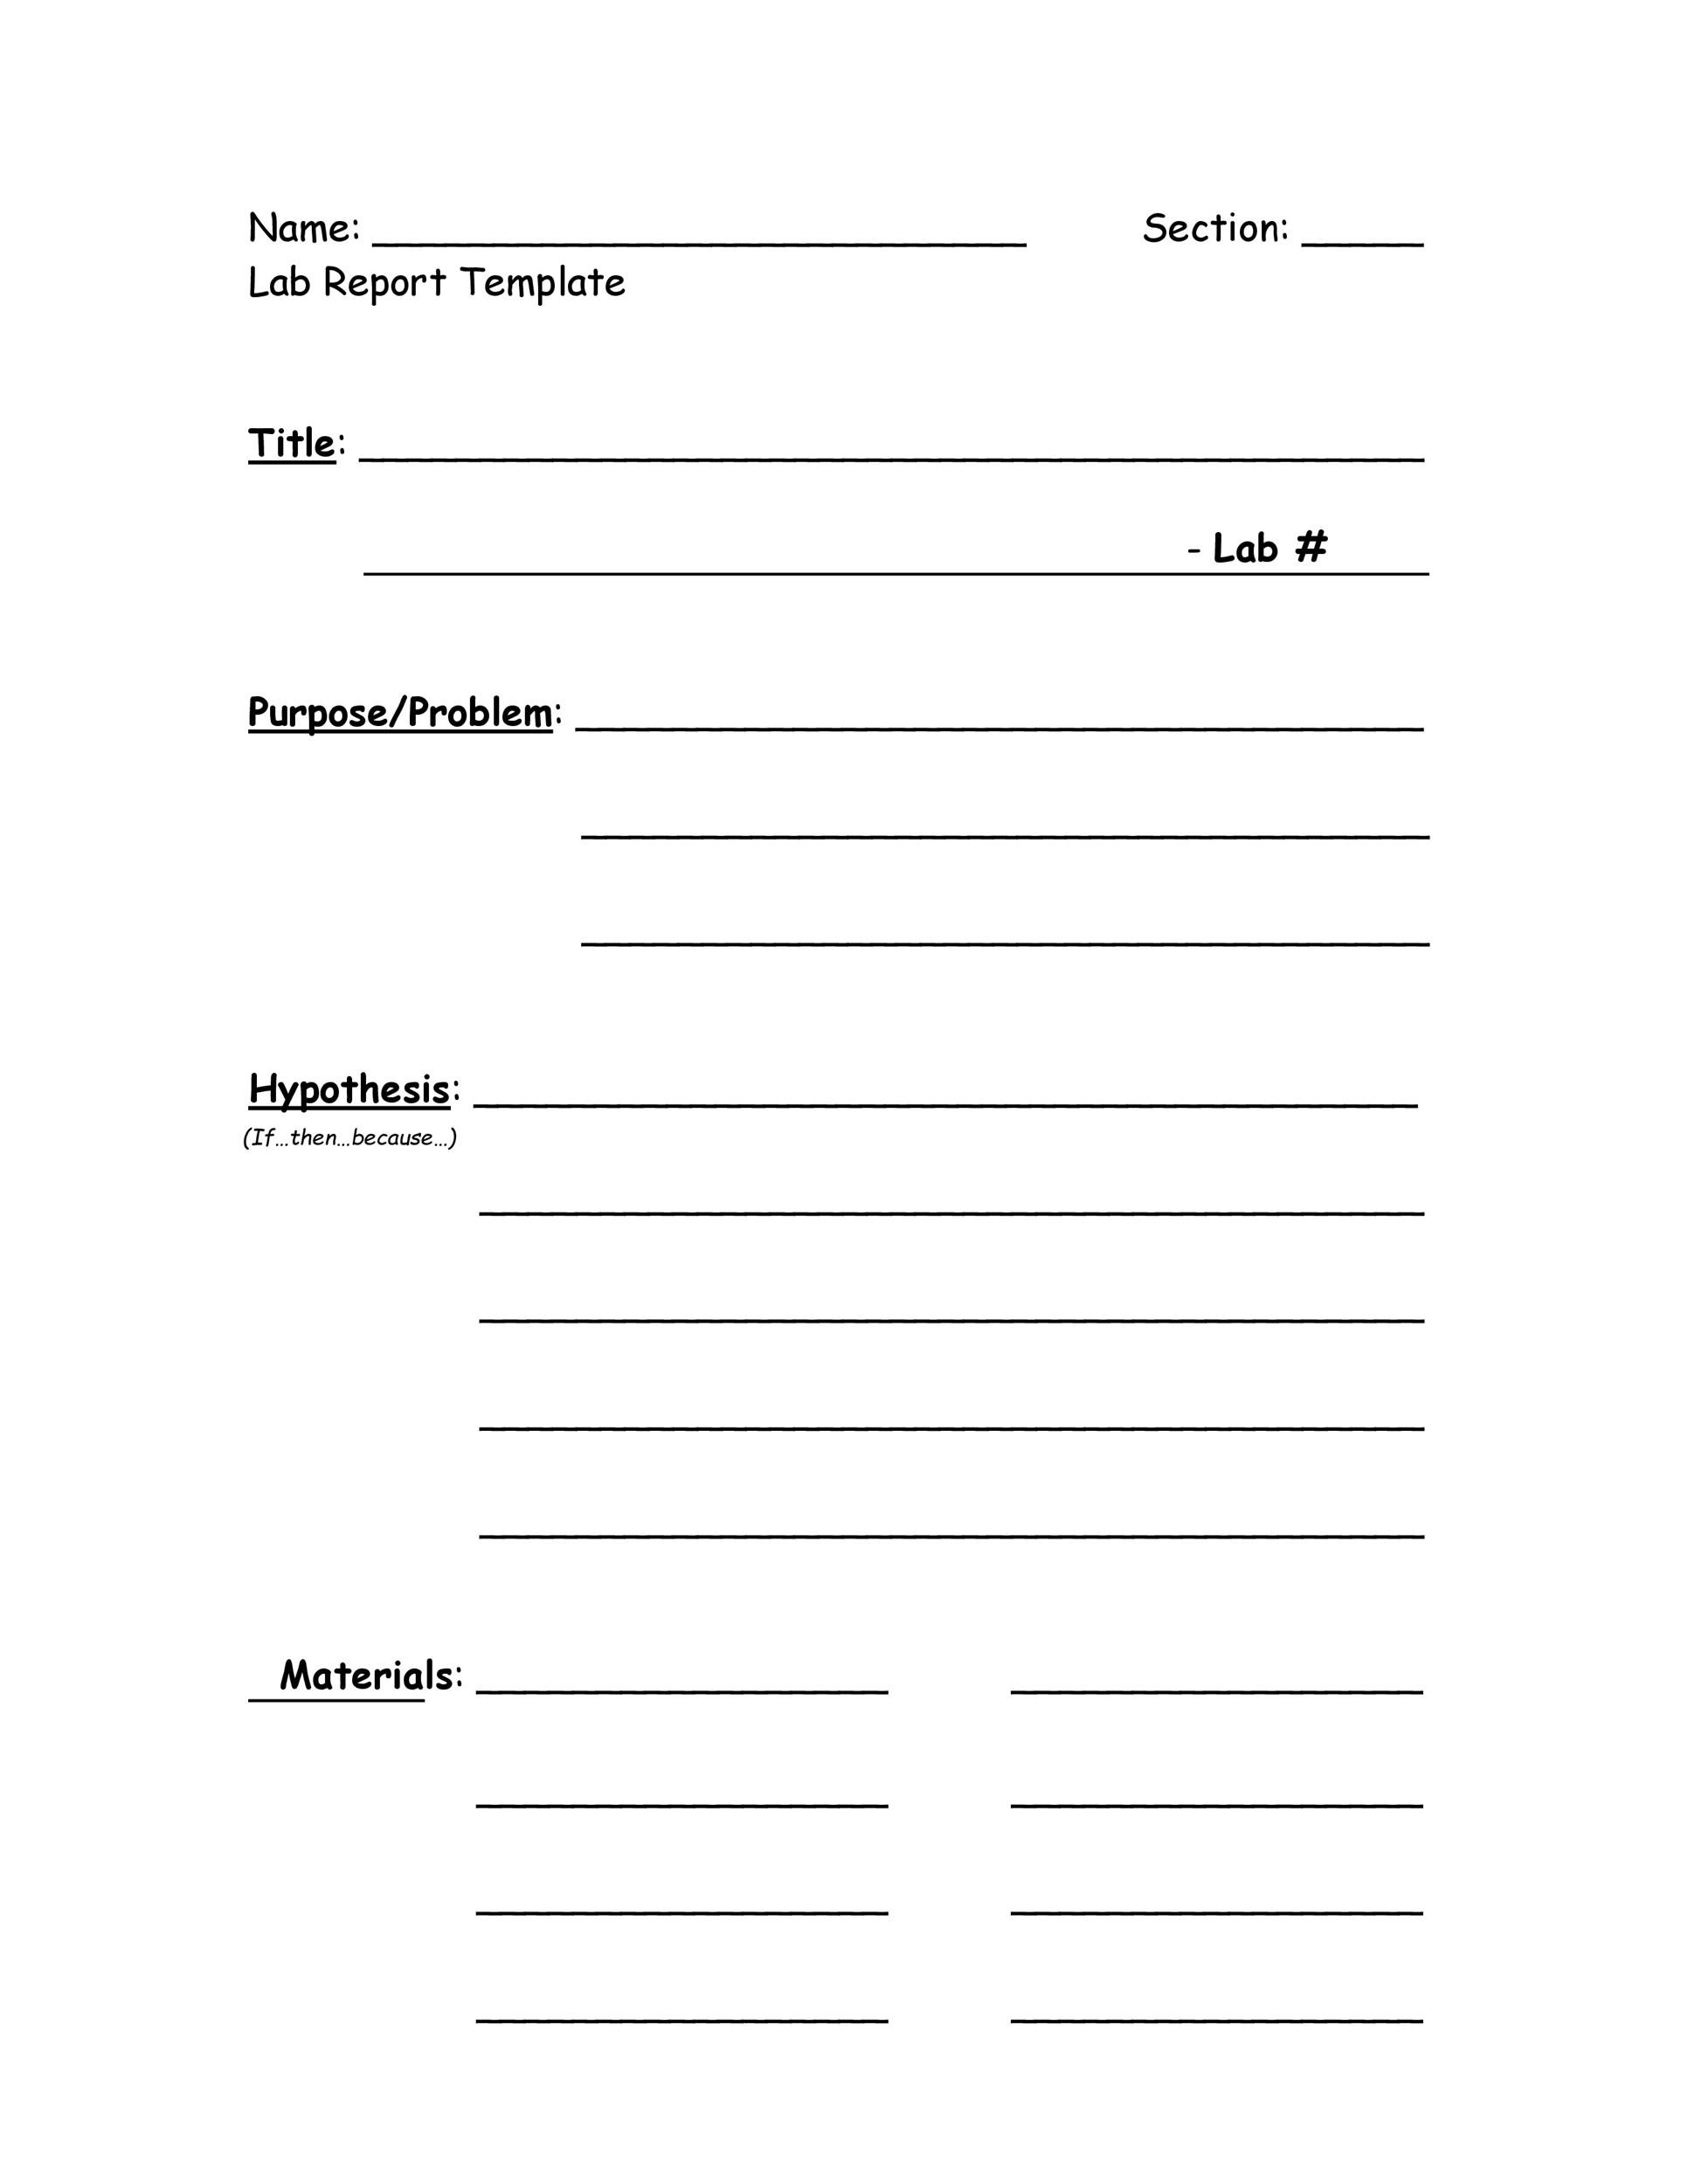 Free lab report template 14